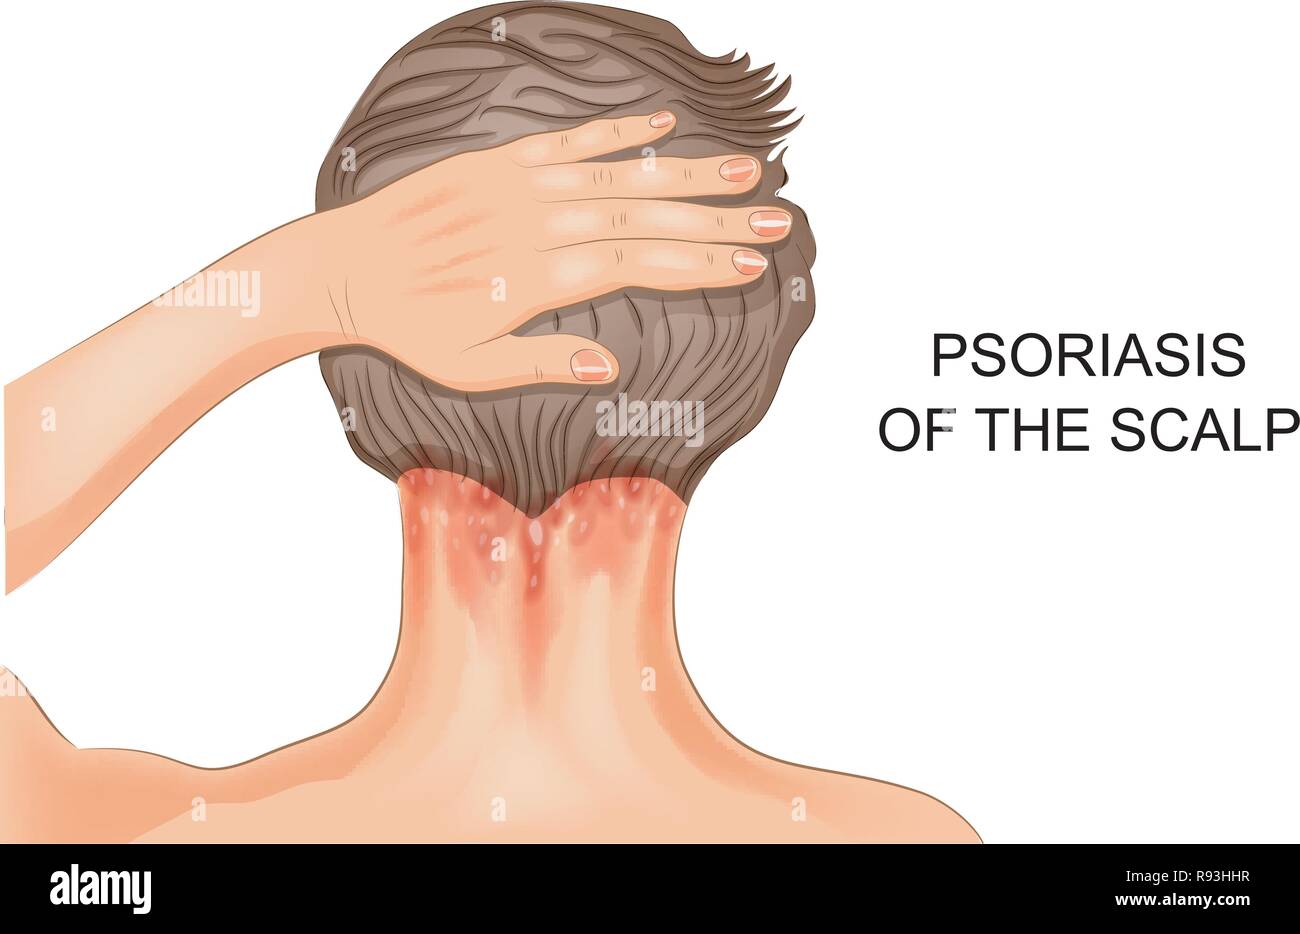 vector illustration of psoriasis of the scalp Stock Vector